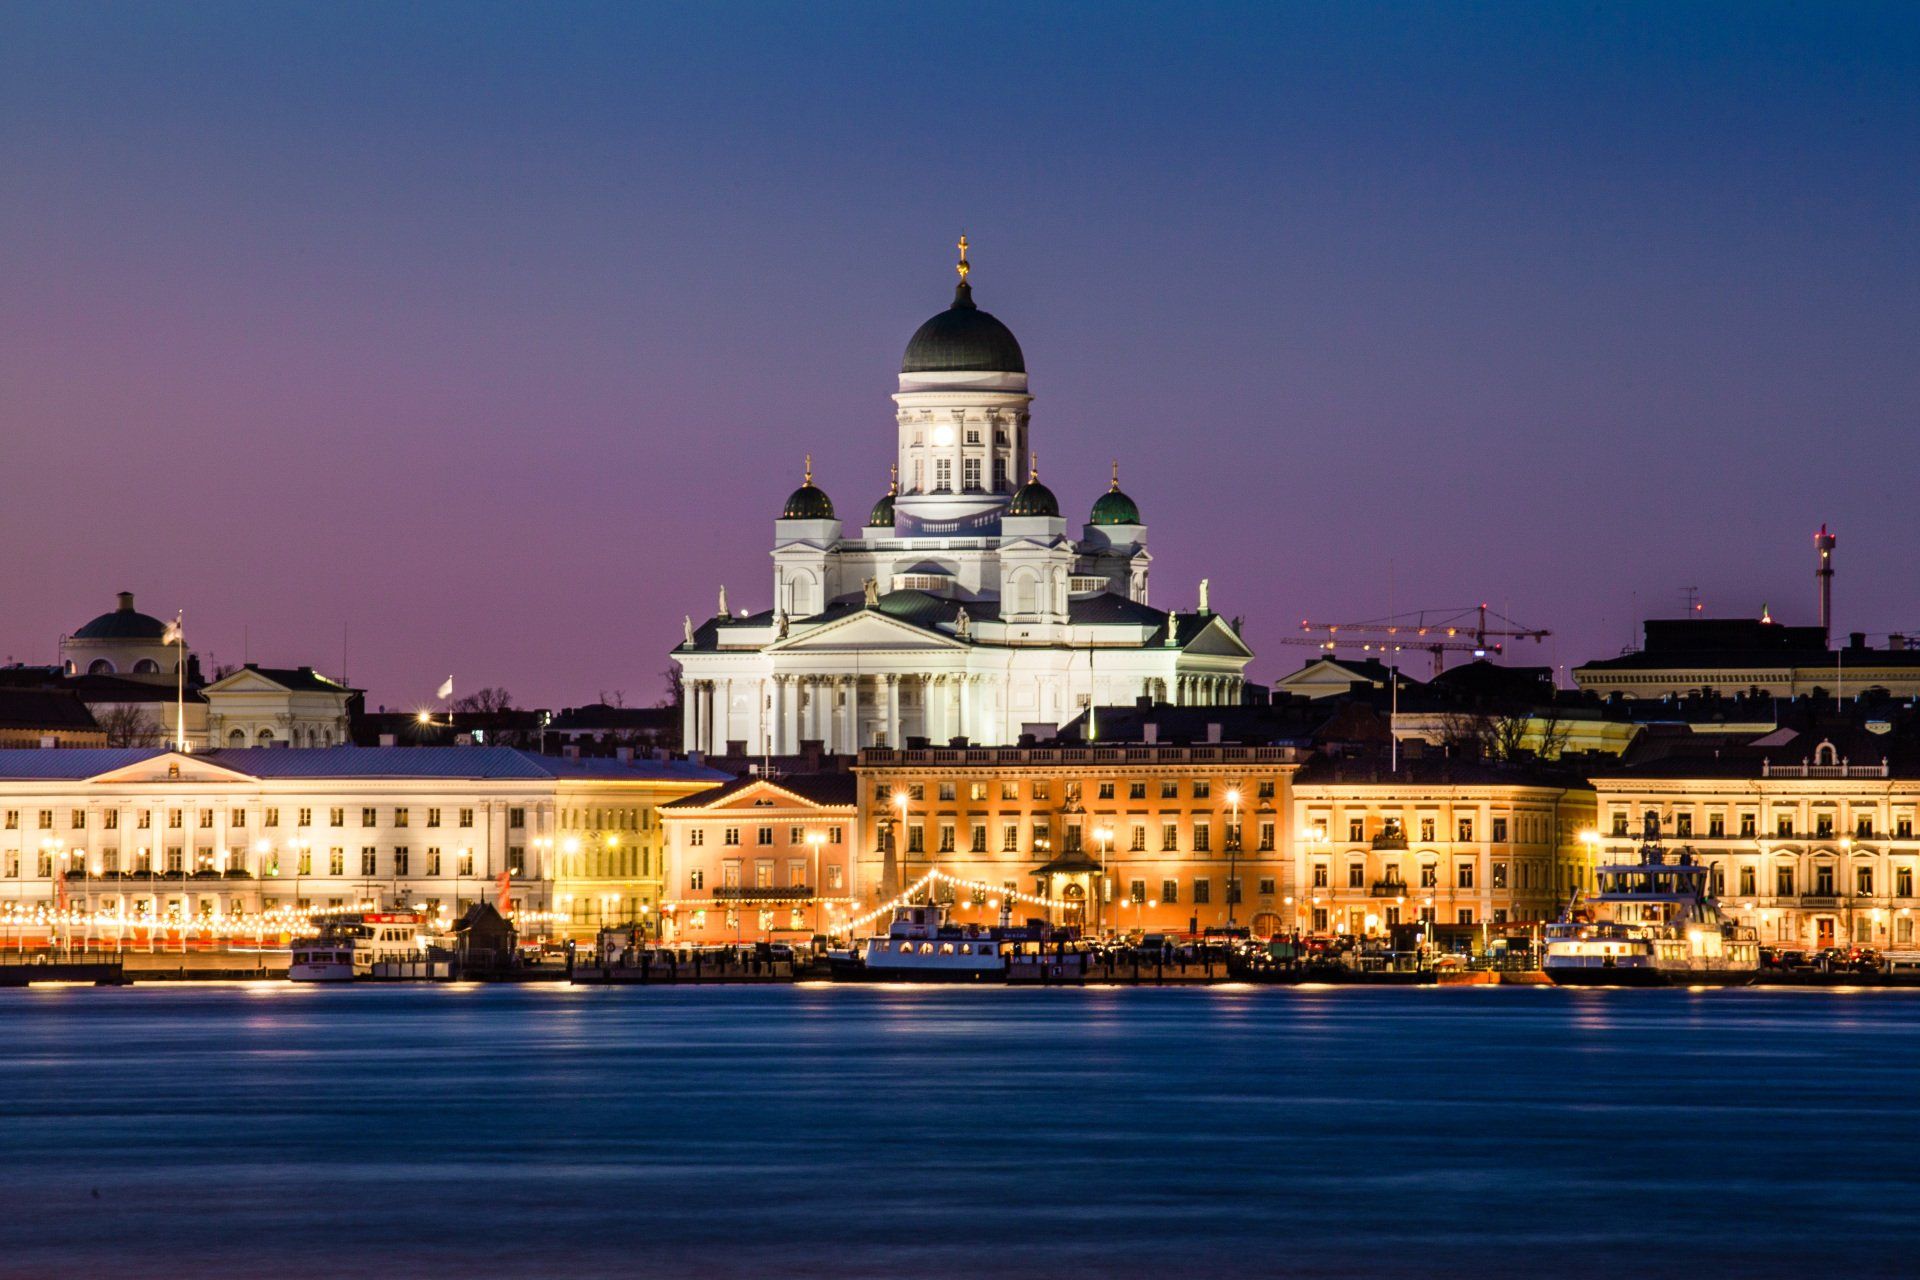 The stunning cityscape of Helsinki at night, with its iconic landmarks and vibrant lights creating a mesmerising view.